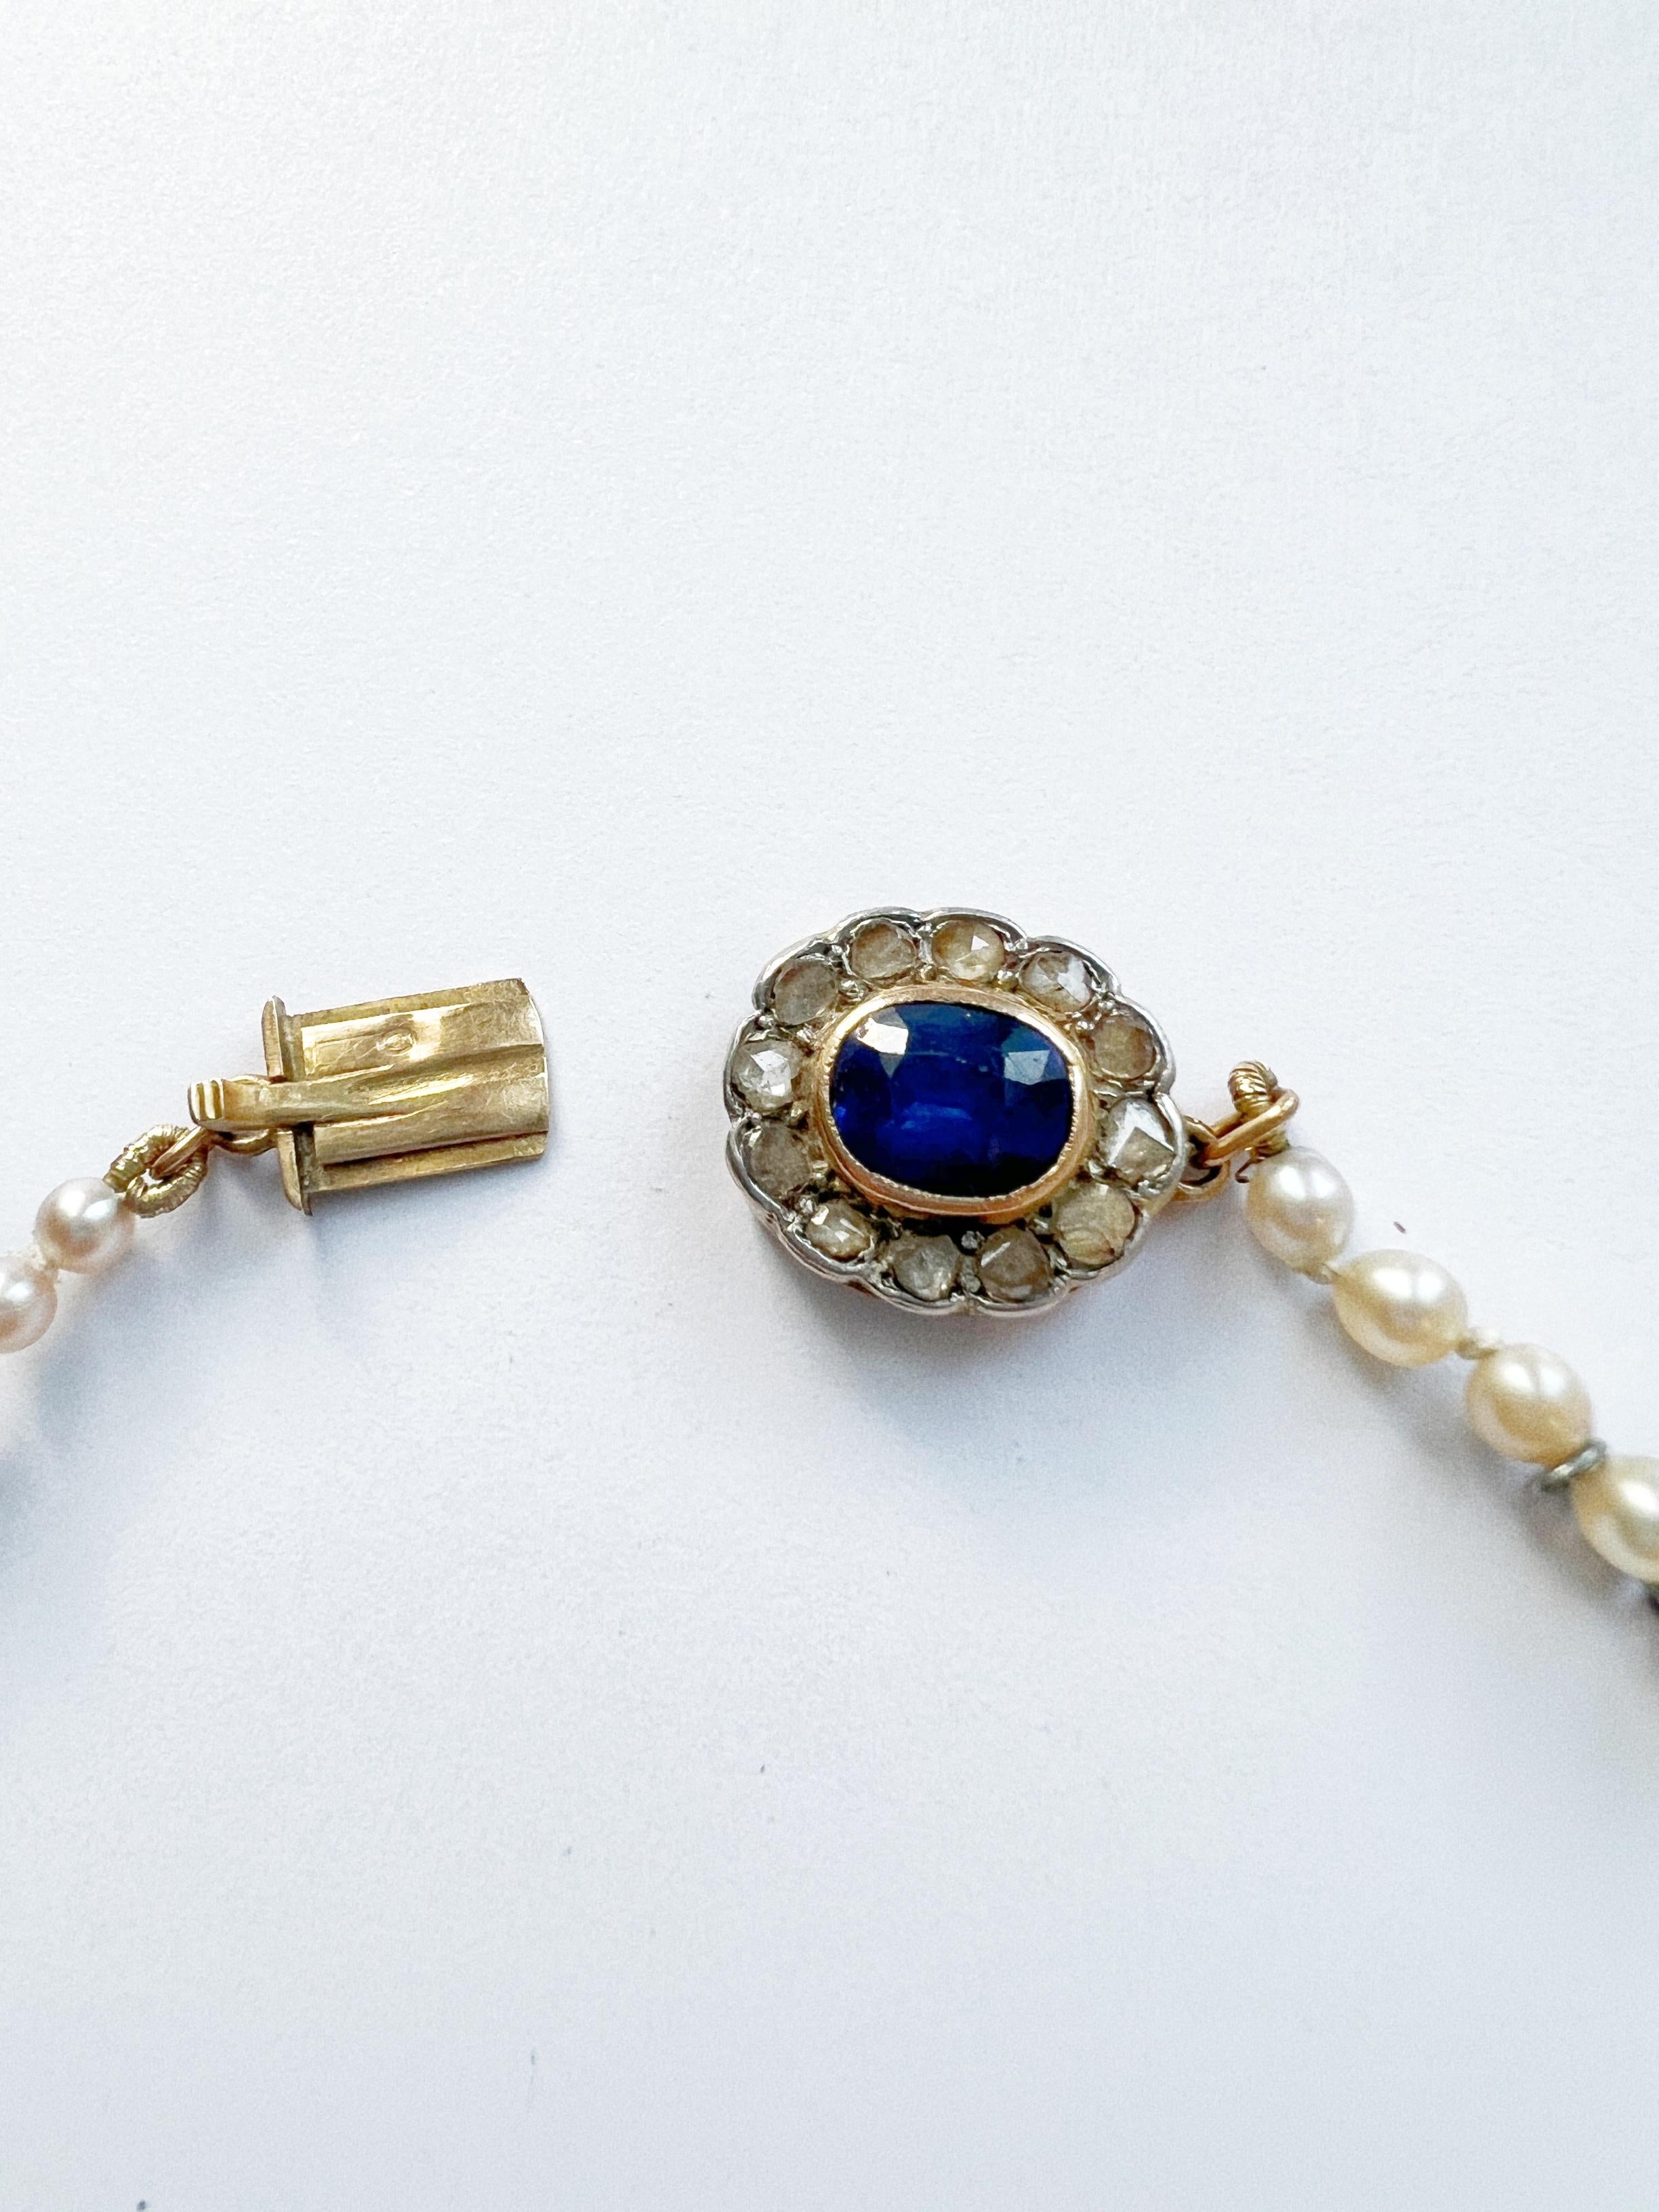 Rose Cut Art Deco Era Akoya Pearl Necklace with 18k Diamond and Blue Sapphire Clasp